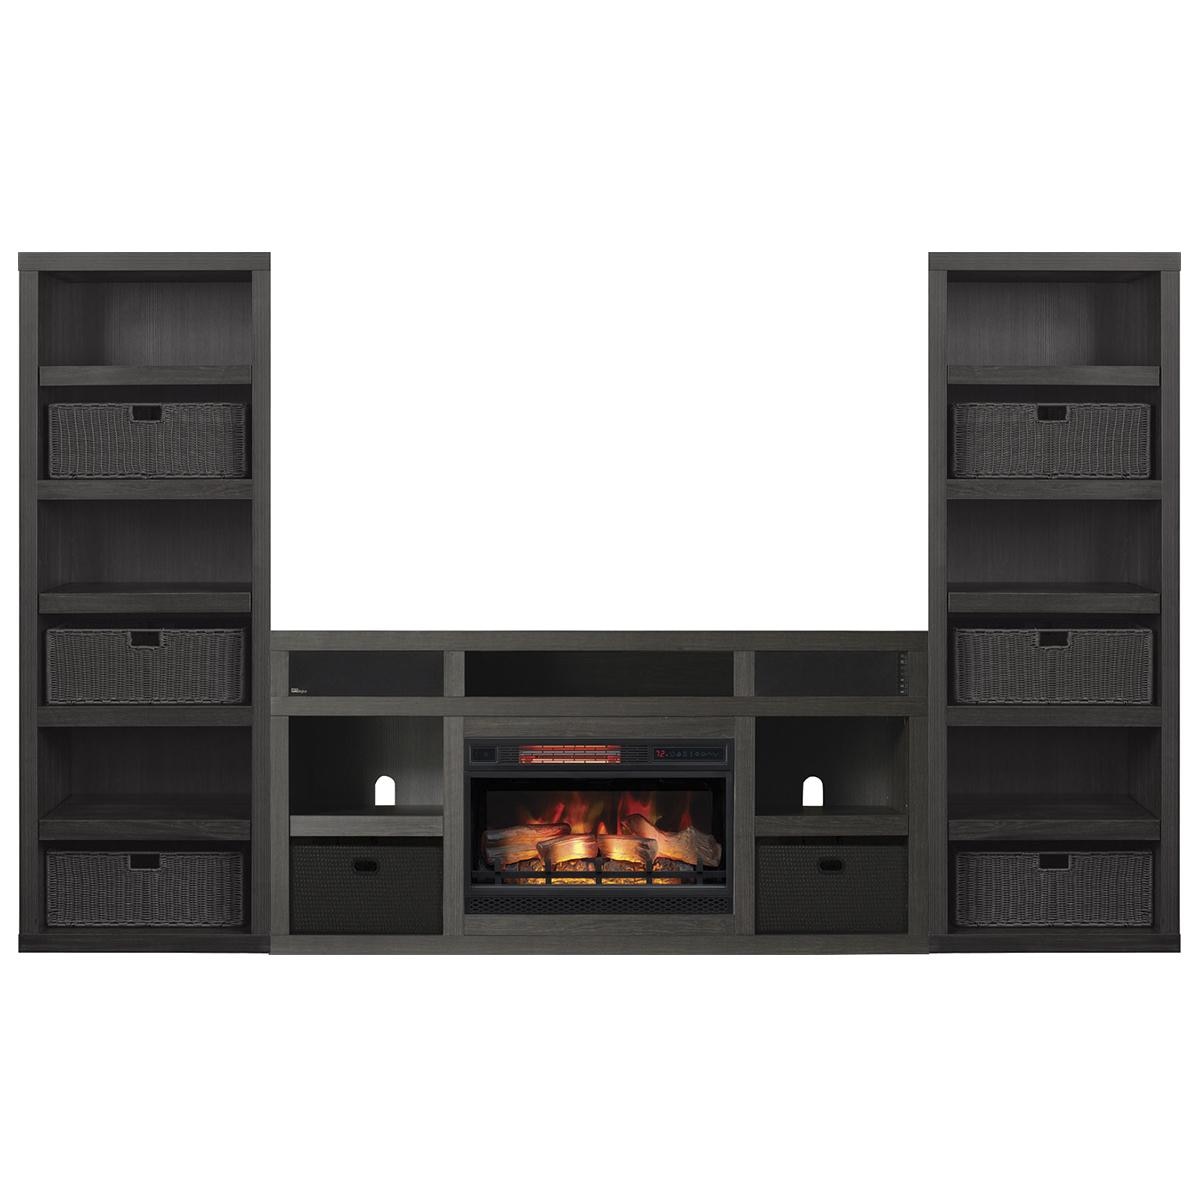 Tv Stand with Fireplace 65 Inch Unique Fabio Flames Greatlin 3 Piece Fireplace Entertainment Wall